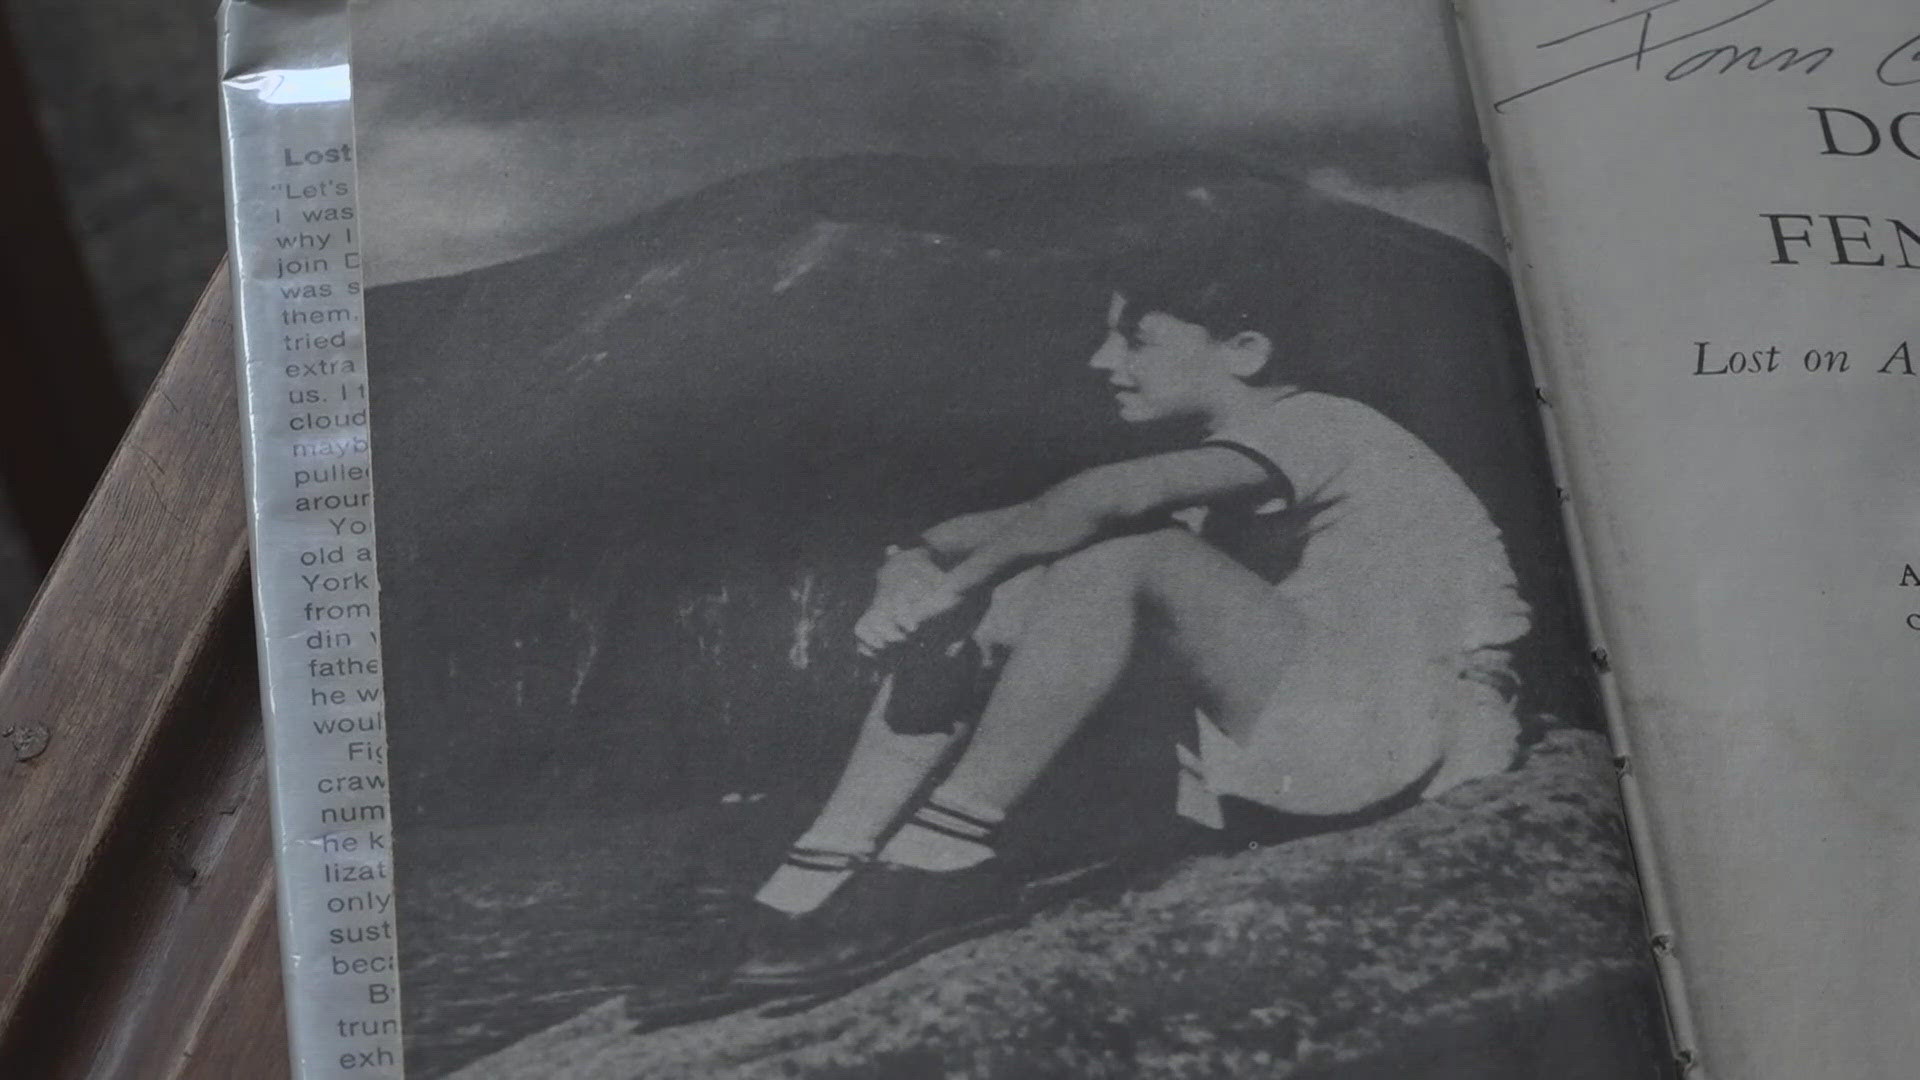 The film adaptation of the renowned book by the same name tells the true story of 11-year-old Donn Fendler's nine days lost in the Katahdin wilderness.